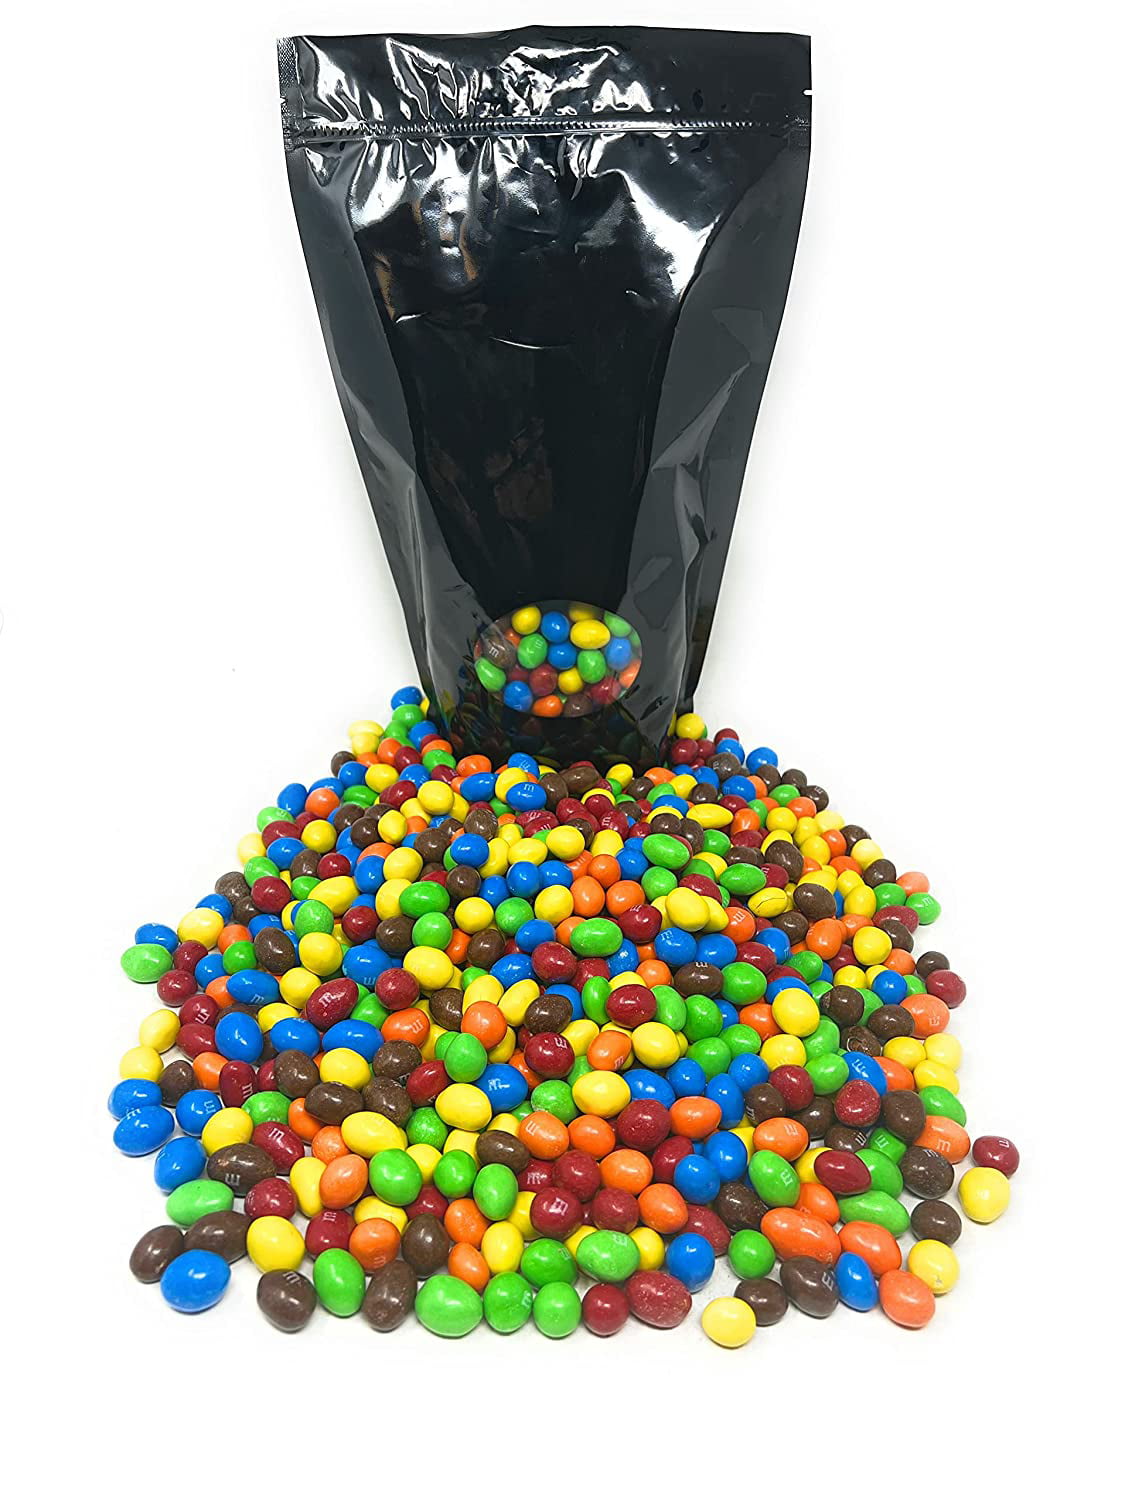 M&M's Milk Chocolate Peanut Carmel and Peanut Butter Combo American Candy  Bulk Pantry Party Size Resealable Wholesale Multipack Variety Bag 2.3 Lbs.  (37 Oz) 